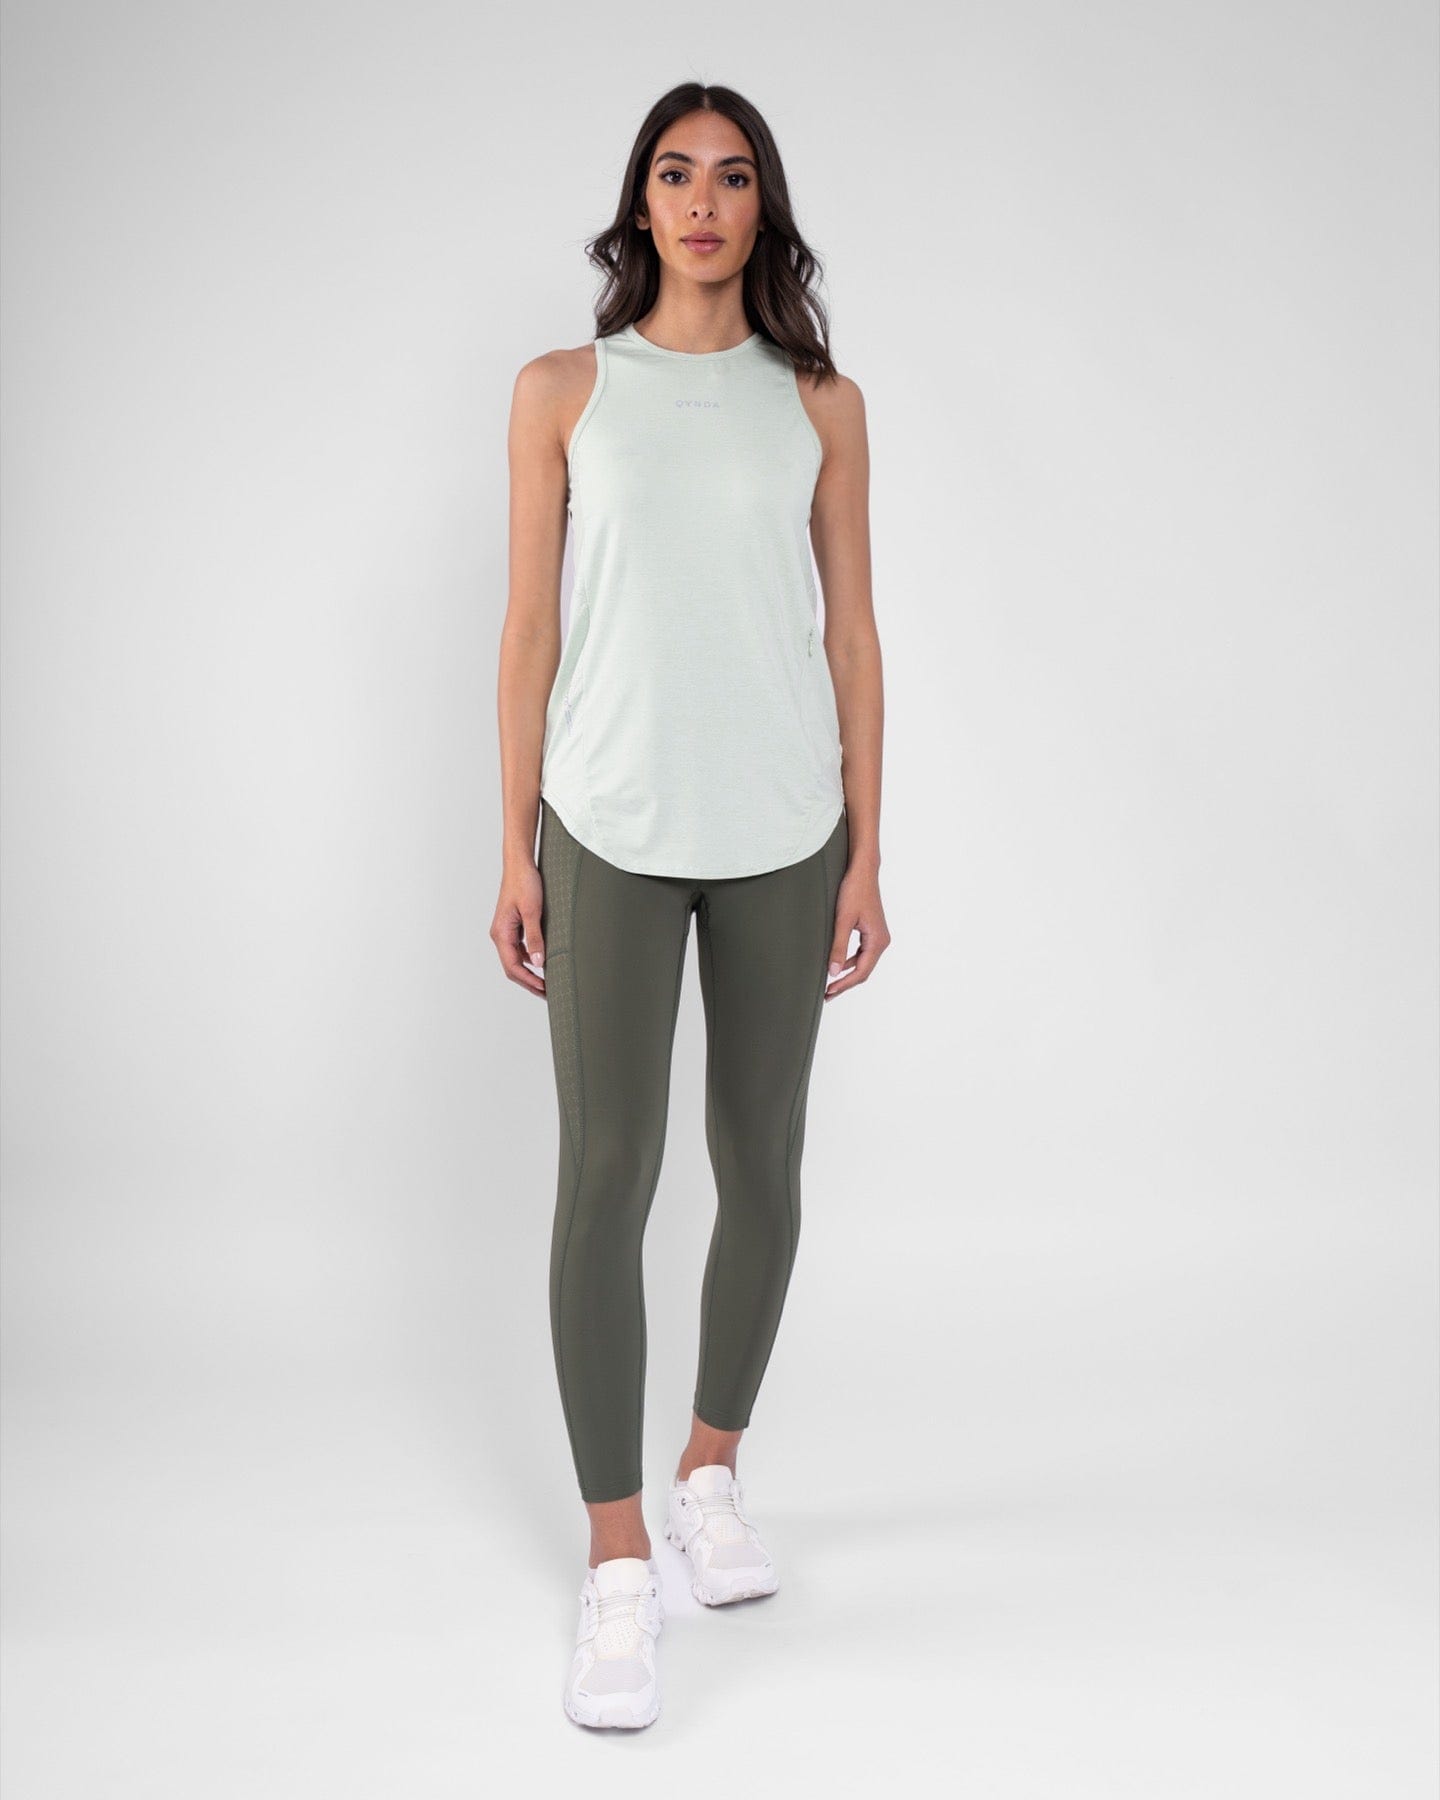 A woman is seen, wearing a RUH TANK TOP and Sage leggings by qynda, standing against a light grey background.